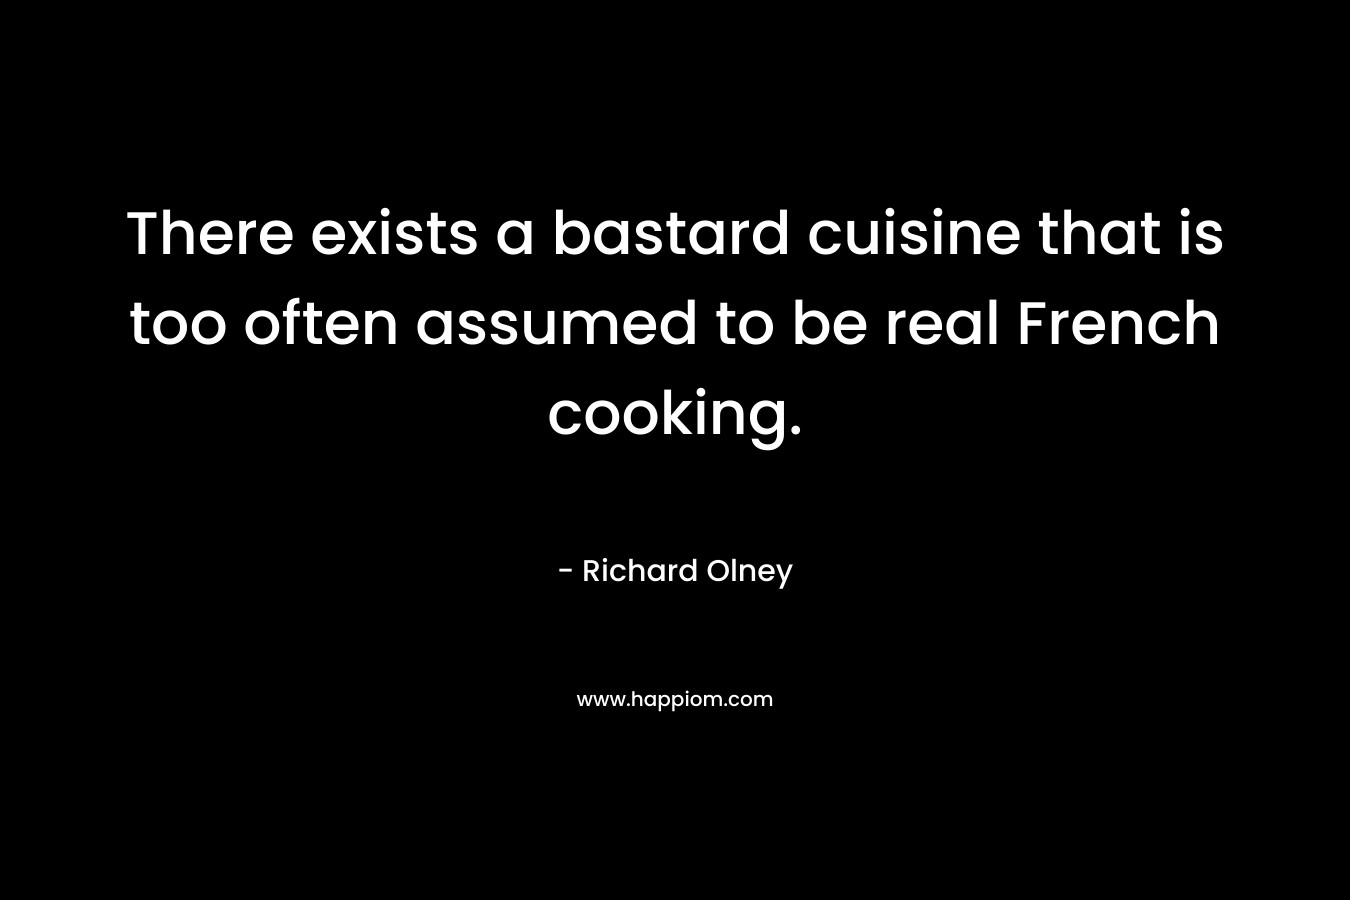 There exists a bastard cuisine that is too often assumed to be real French cooking.